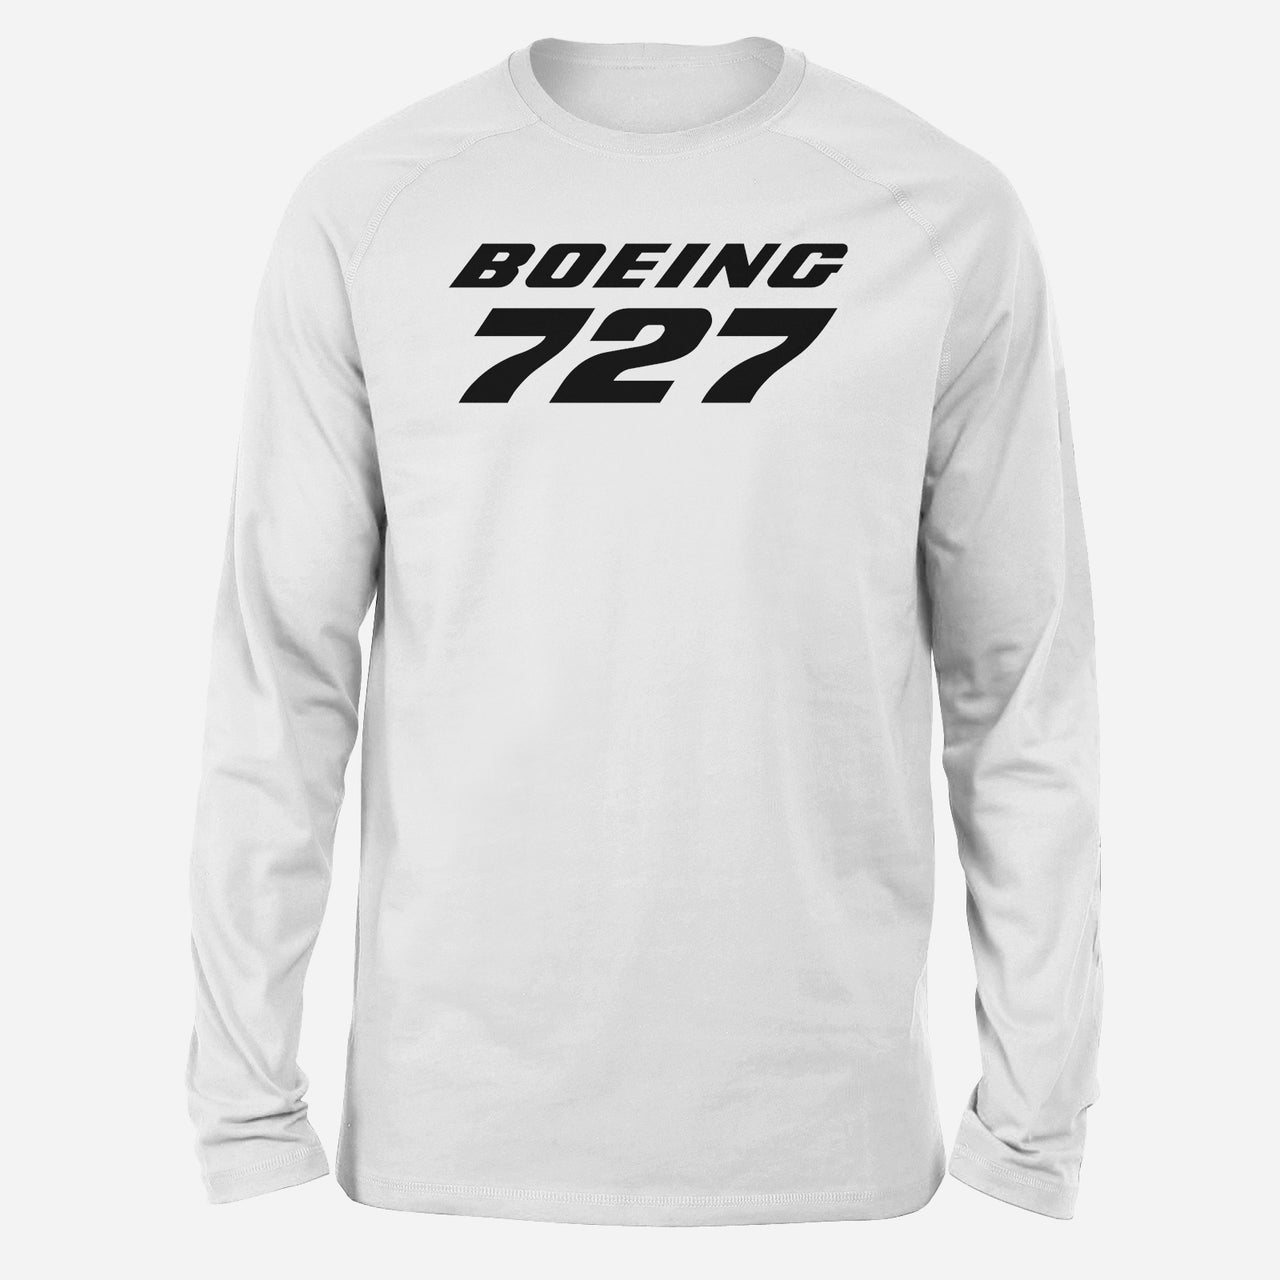 Boeing 727 & Text Designed Long-Sleeve T-Shirts